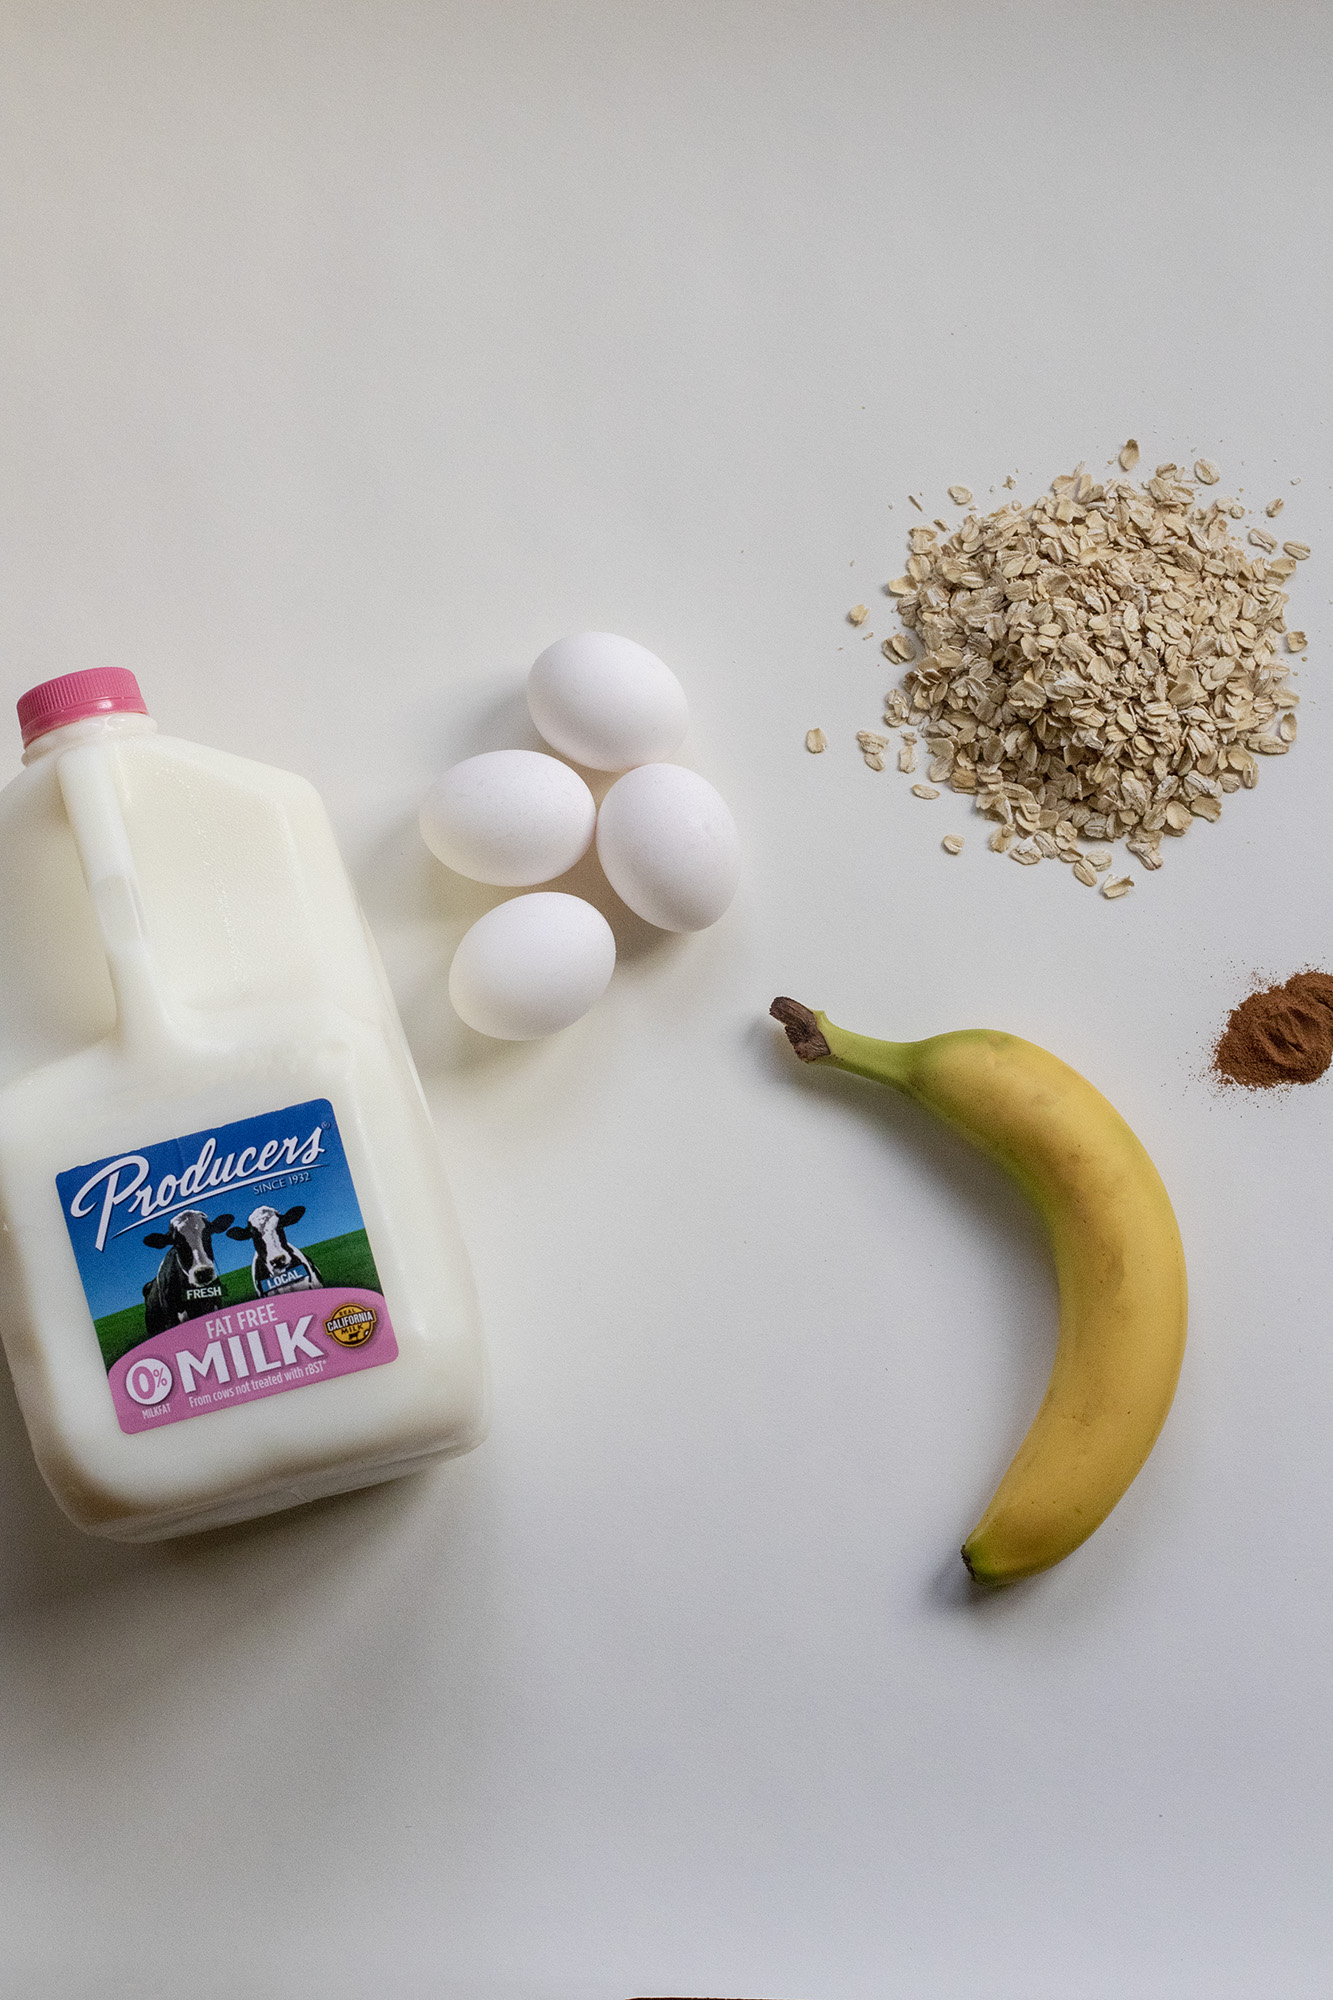 Fat free gallon of Producers milk, 4 eggs, one banana, pile of ads and cinnamon on a white background.